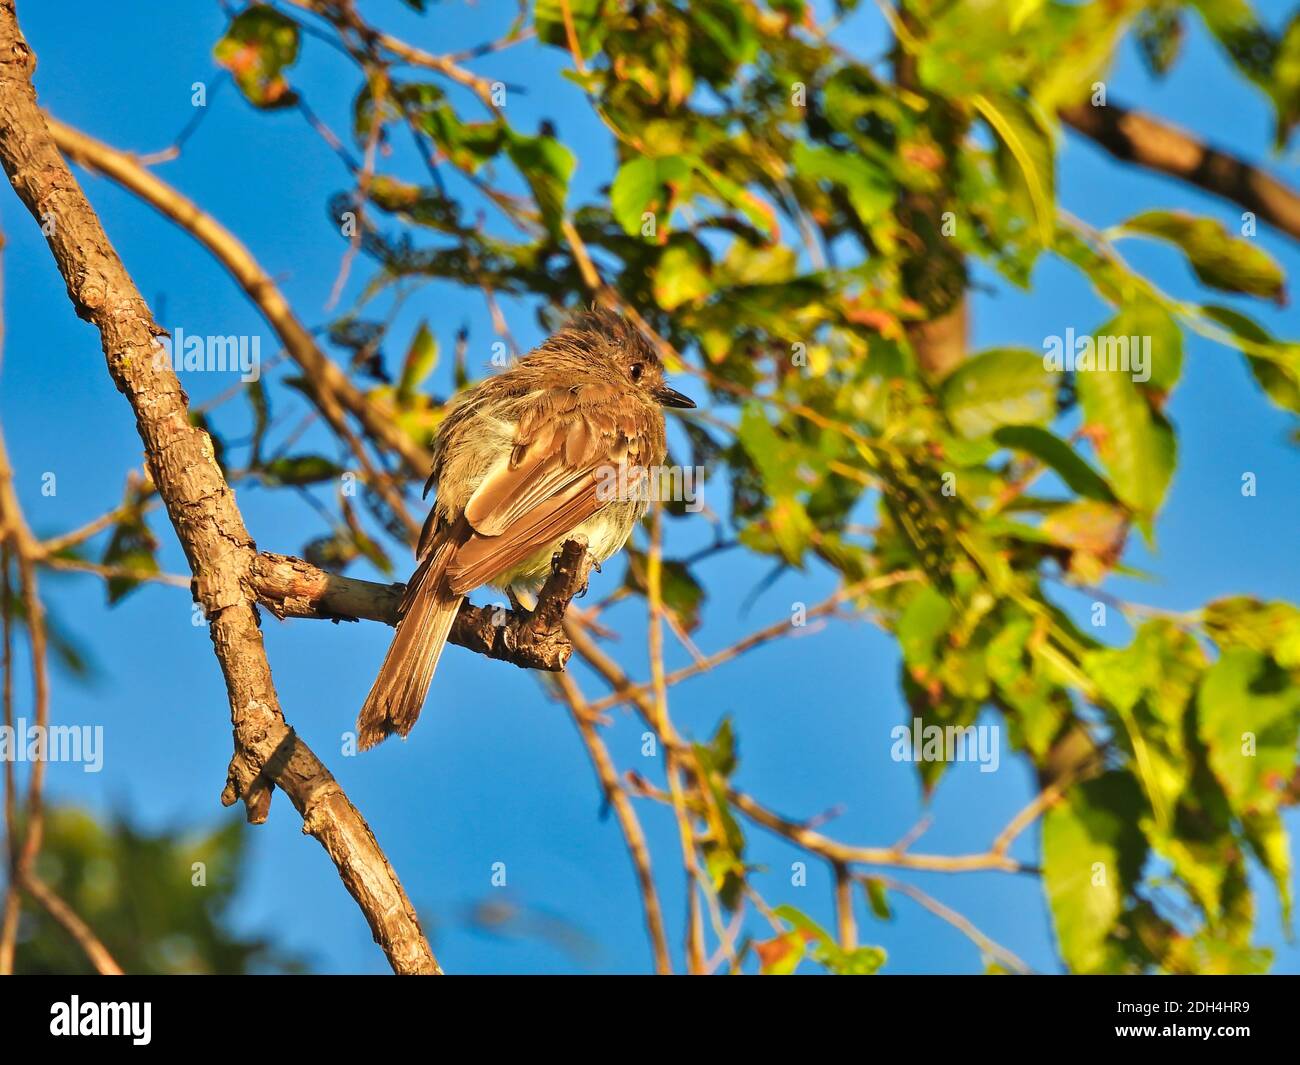 Flycatcher Bird Sits Perched on a Tree Branch Soaking in the Morning Sun at Dawn with Green Leaves and Bright Blue Sky in Background Stock Photo